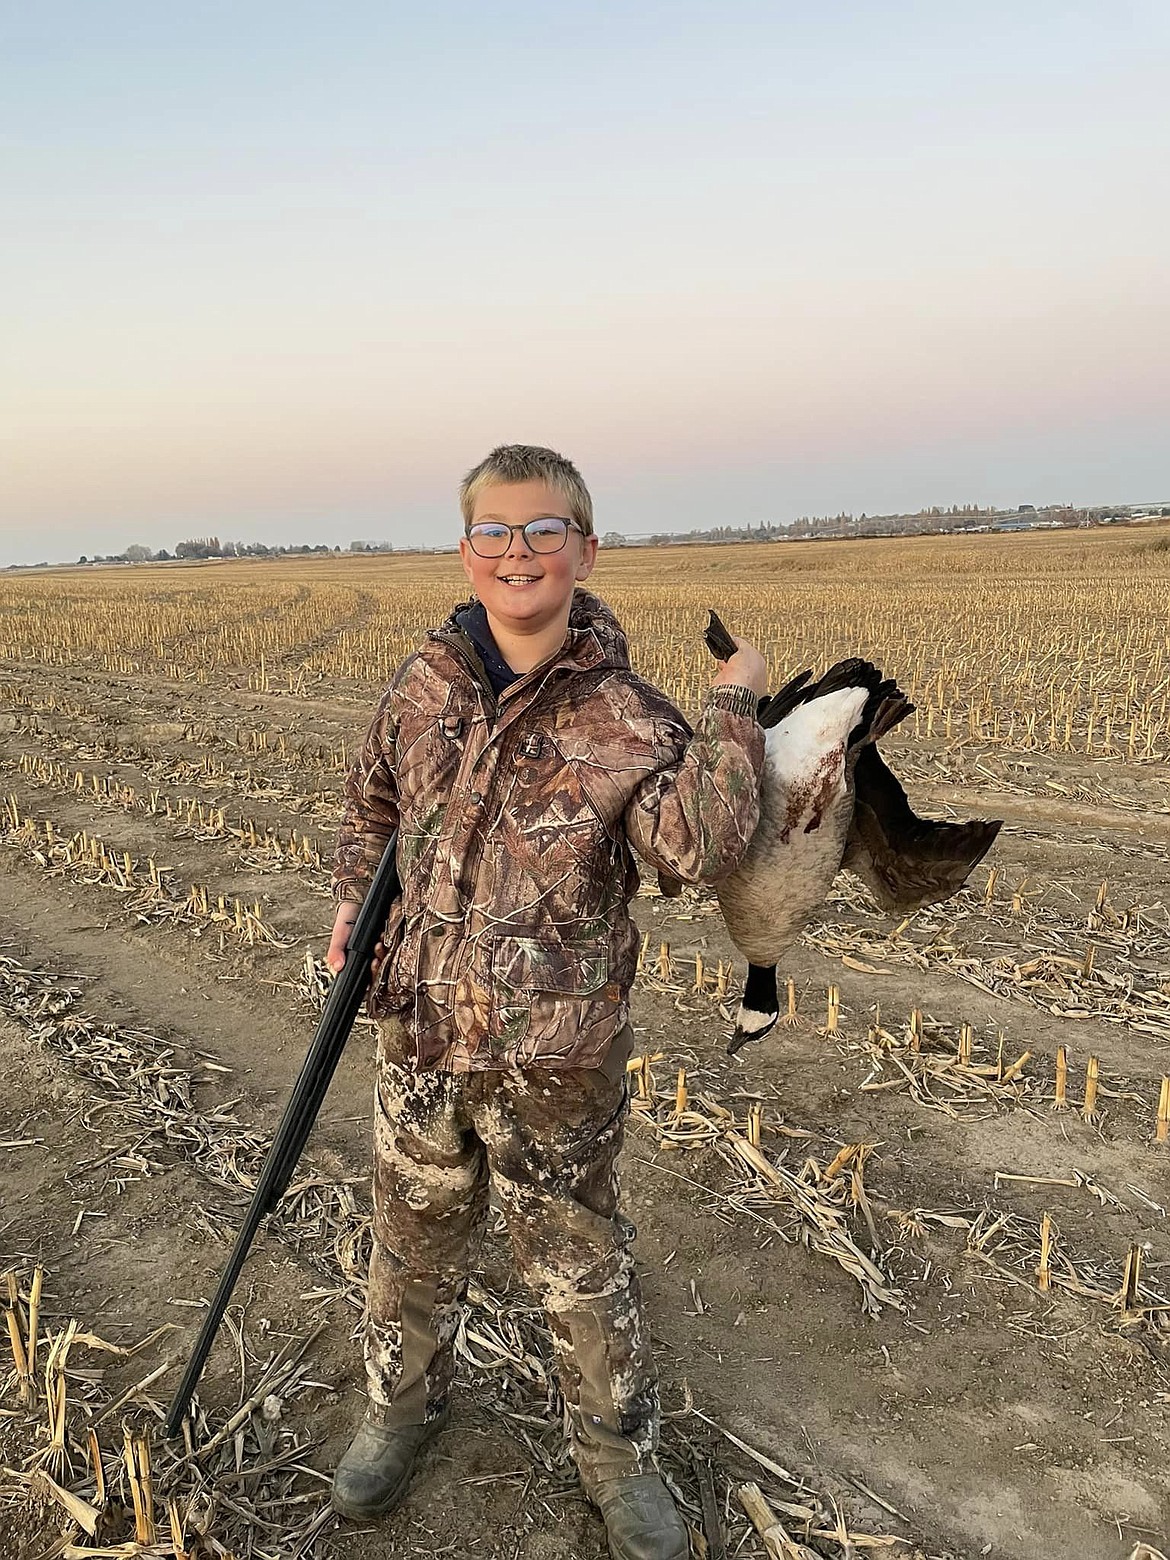 Echternkamps Guide Services has many good-standing relationships with private landowners which allows them to lease over 20,000 acres of agricultural land and cattle farms in Central Washington to hunt on, their website states.